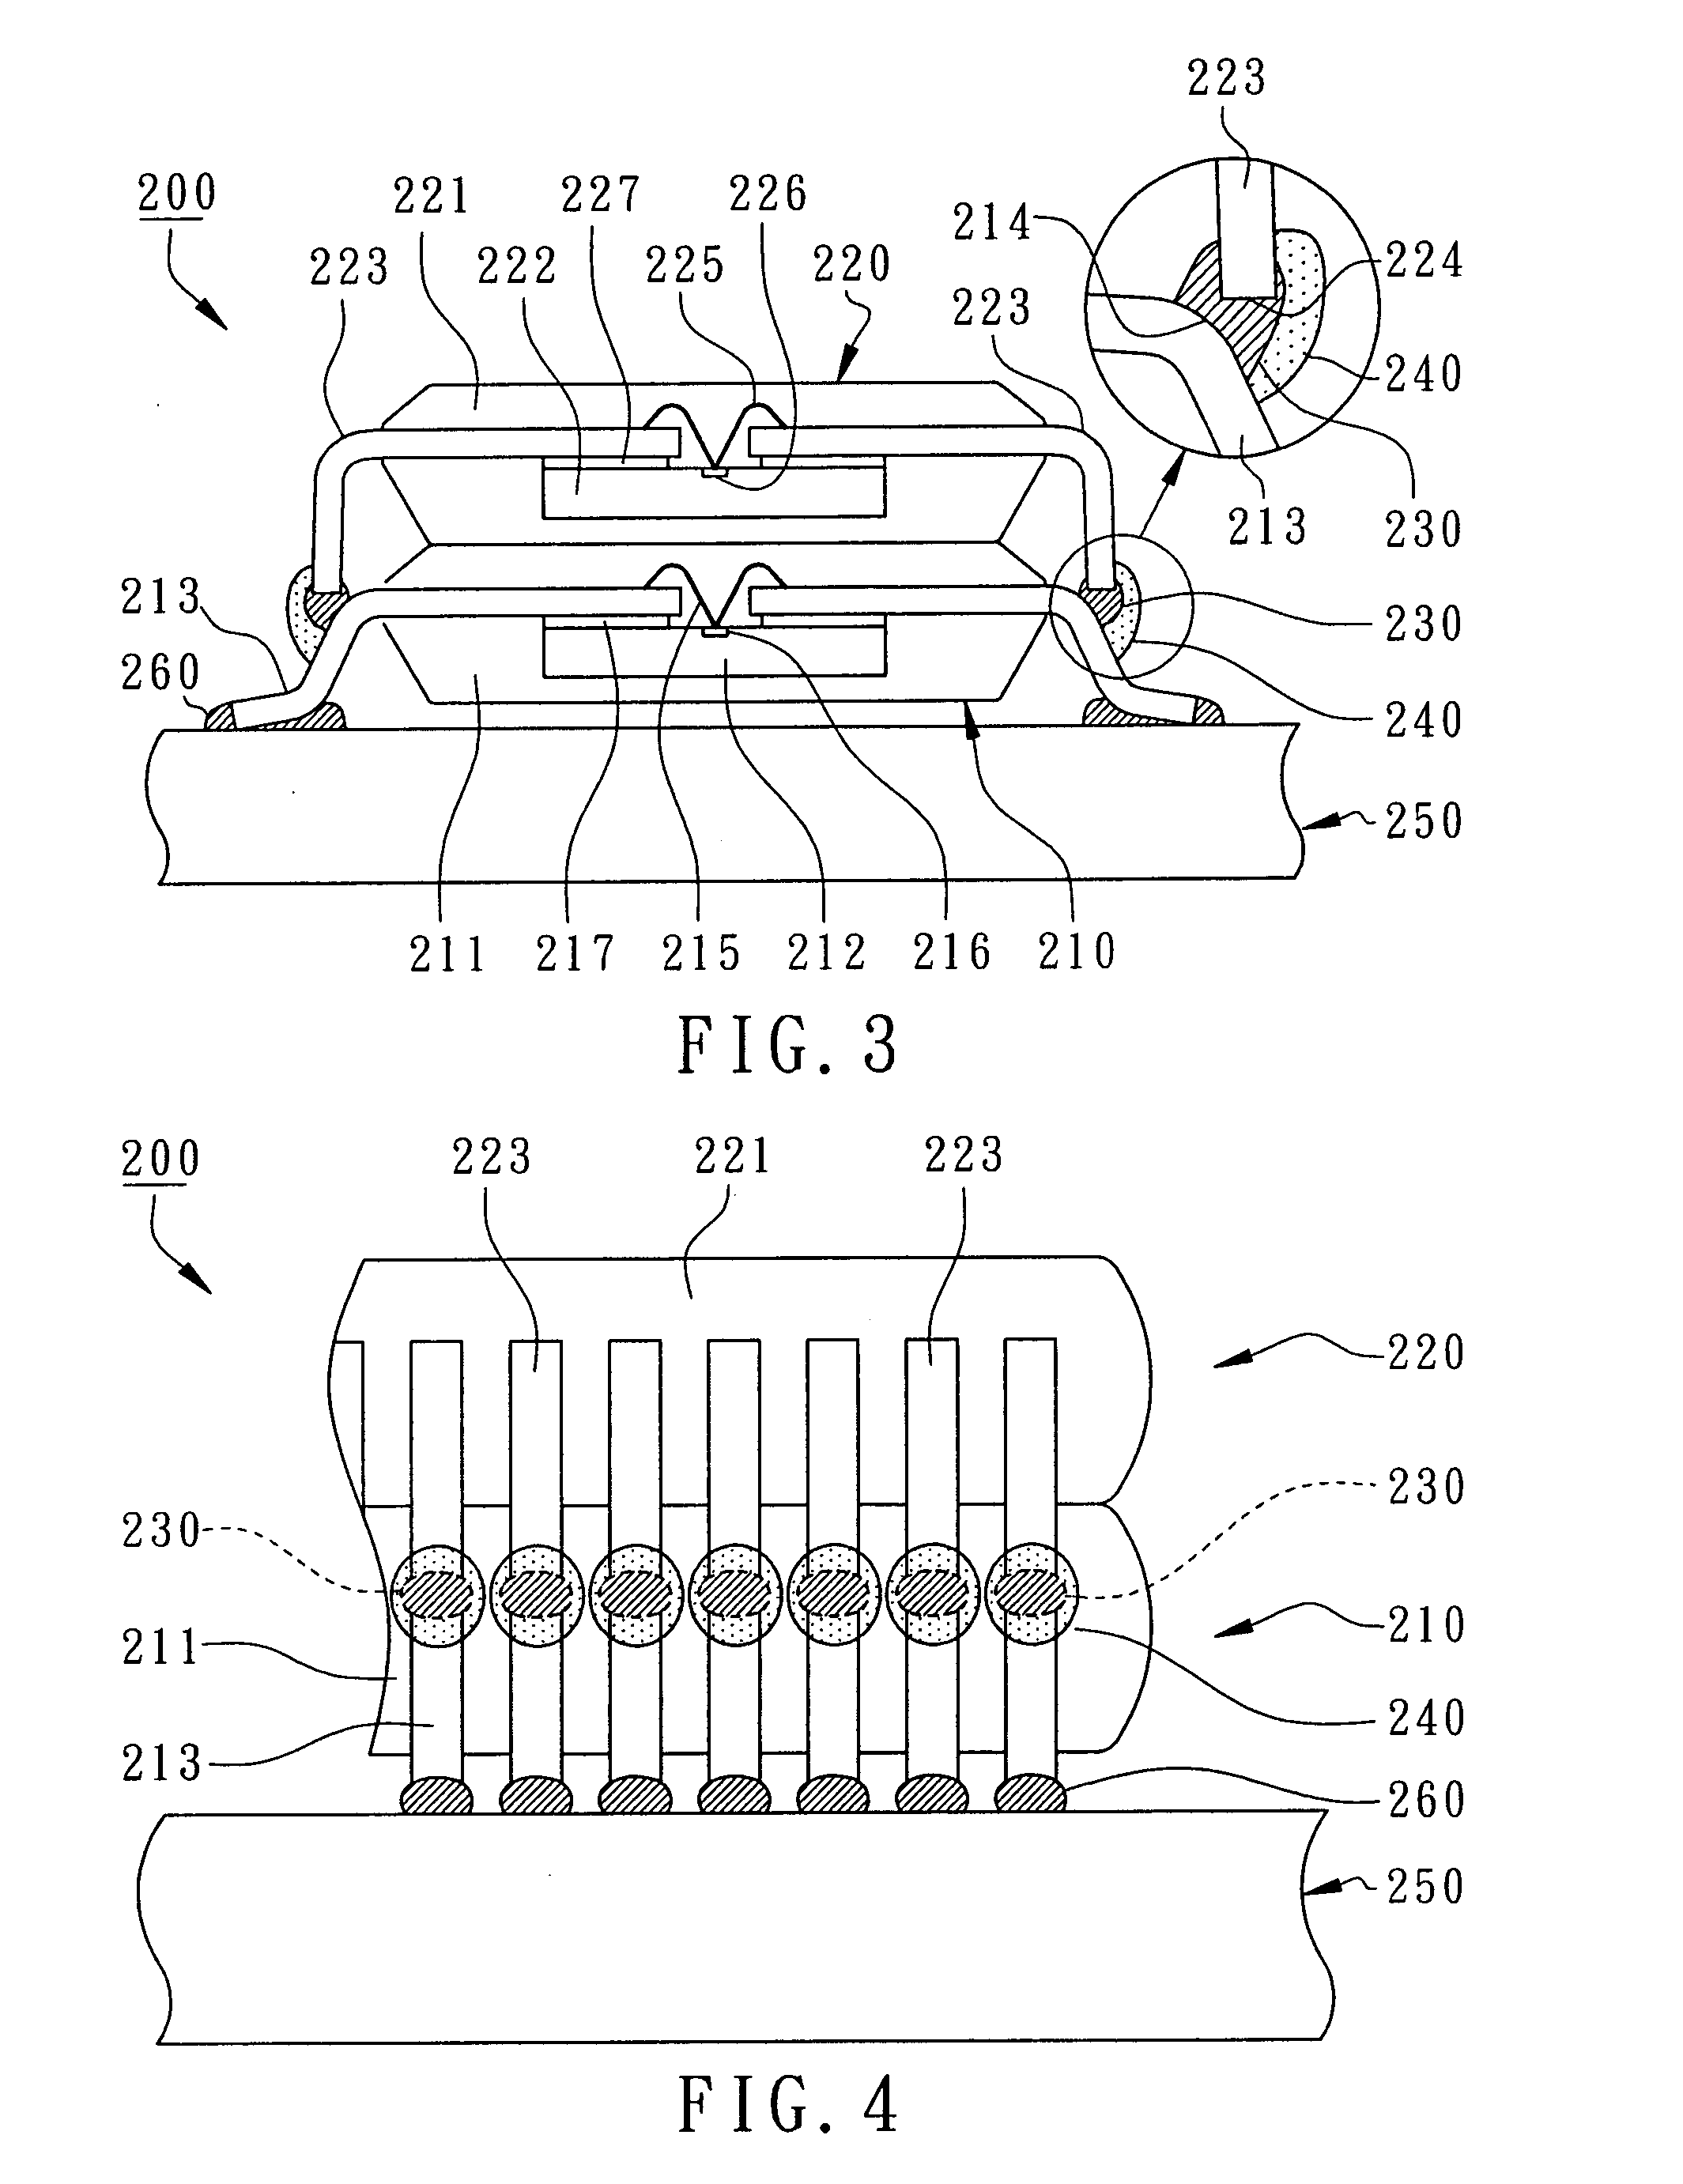 POP (Package-On-Package) device encapsulating soldered joints between externals leads